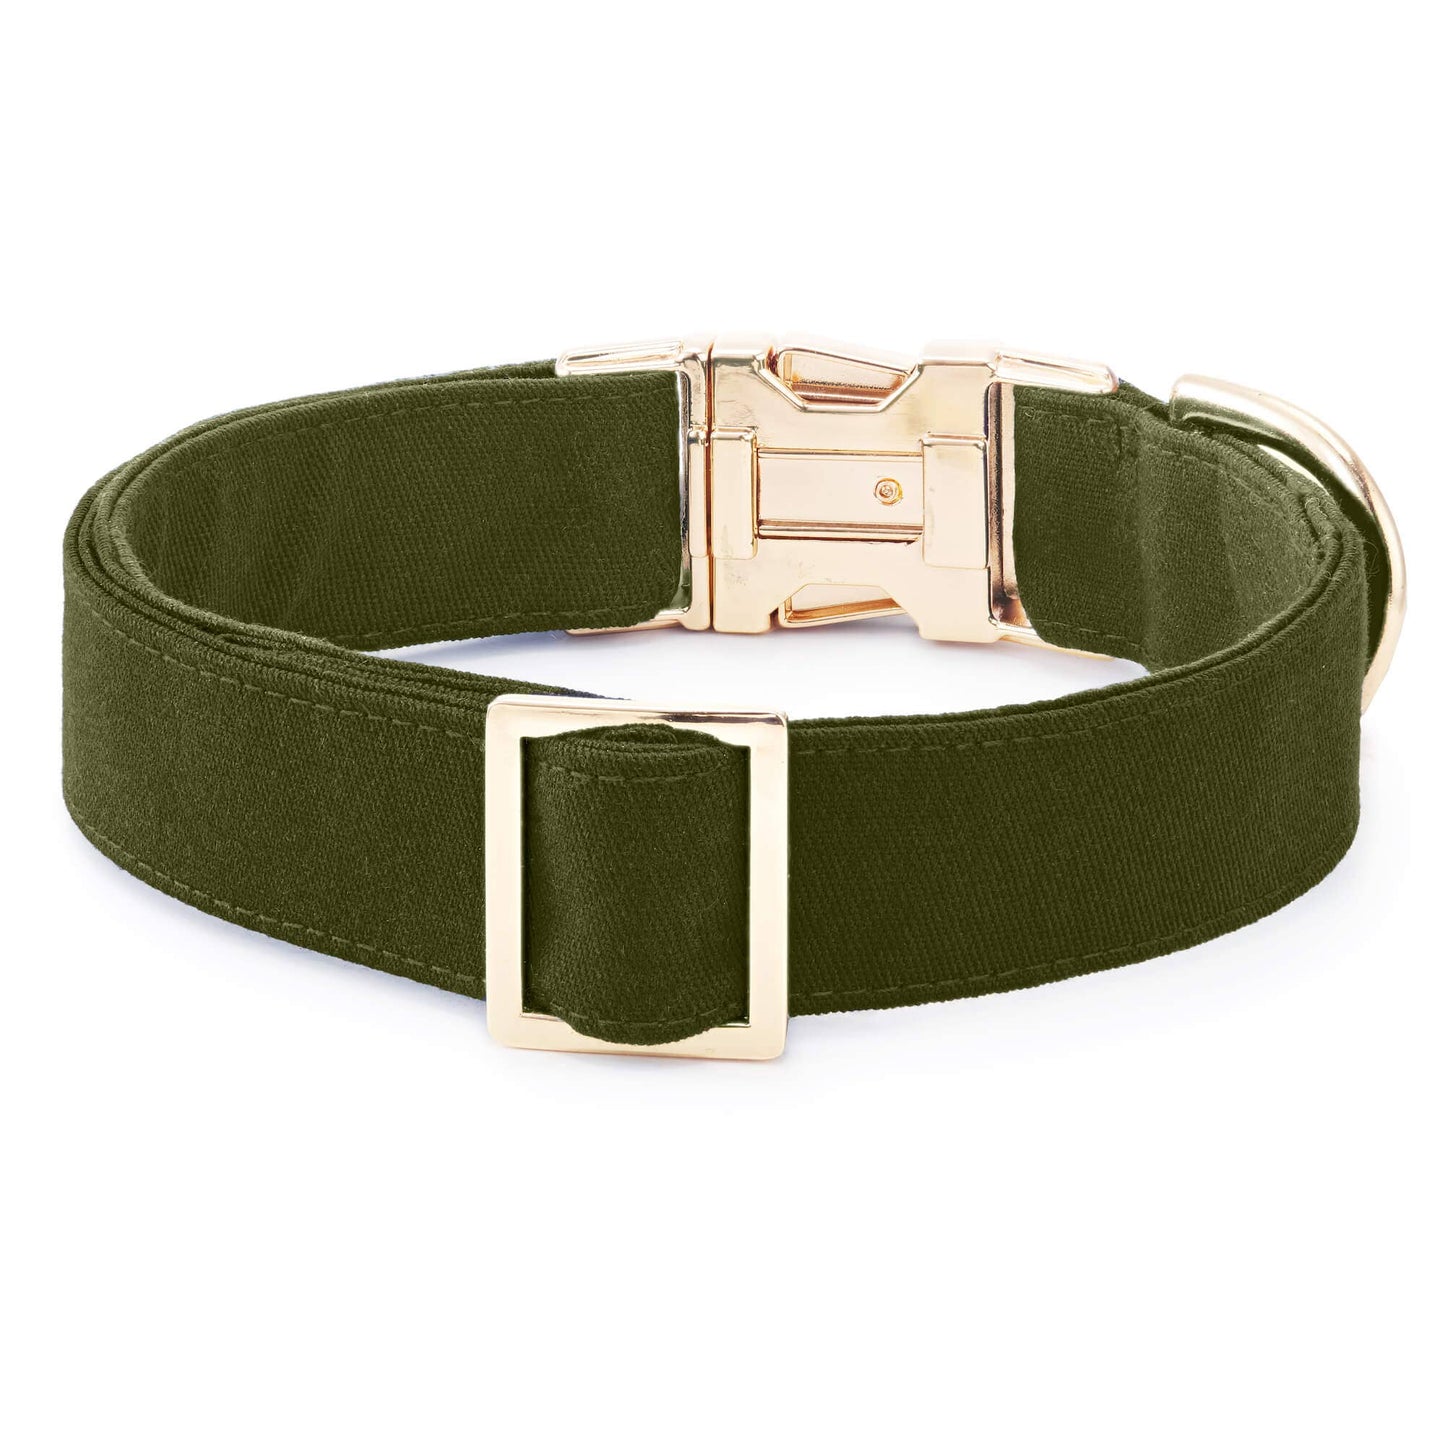 Olive Dog Collar With Gold Hardware - The Foggy Dog